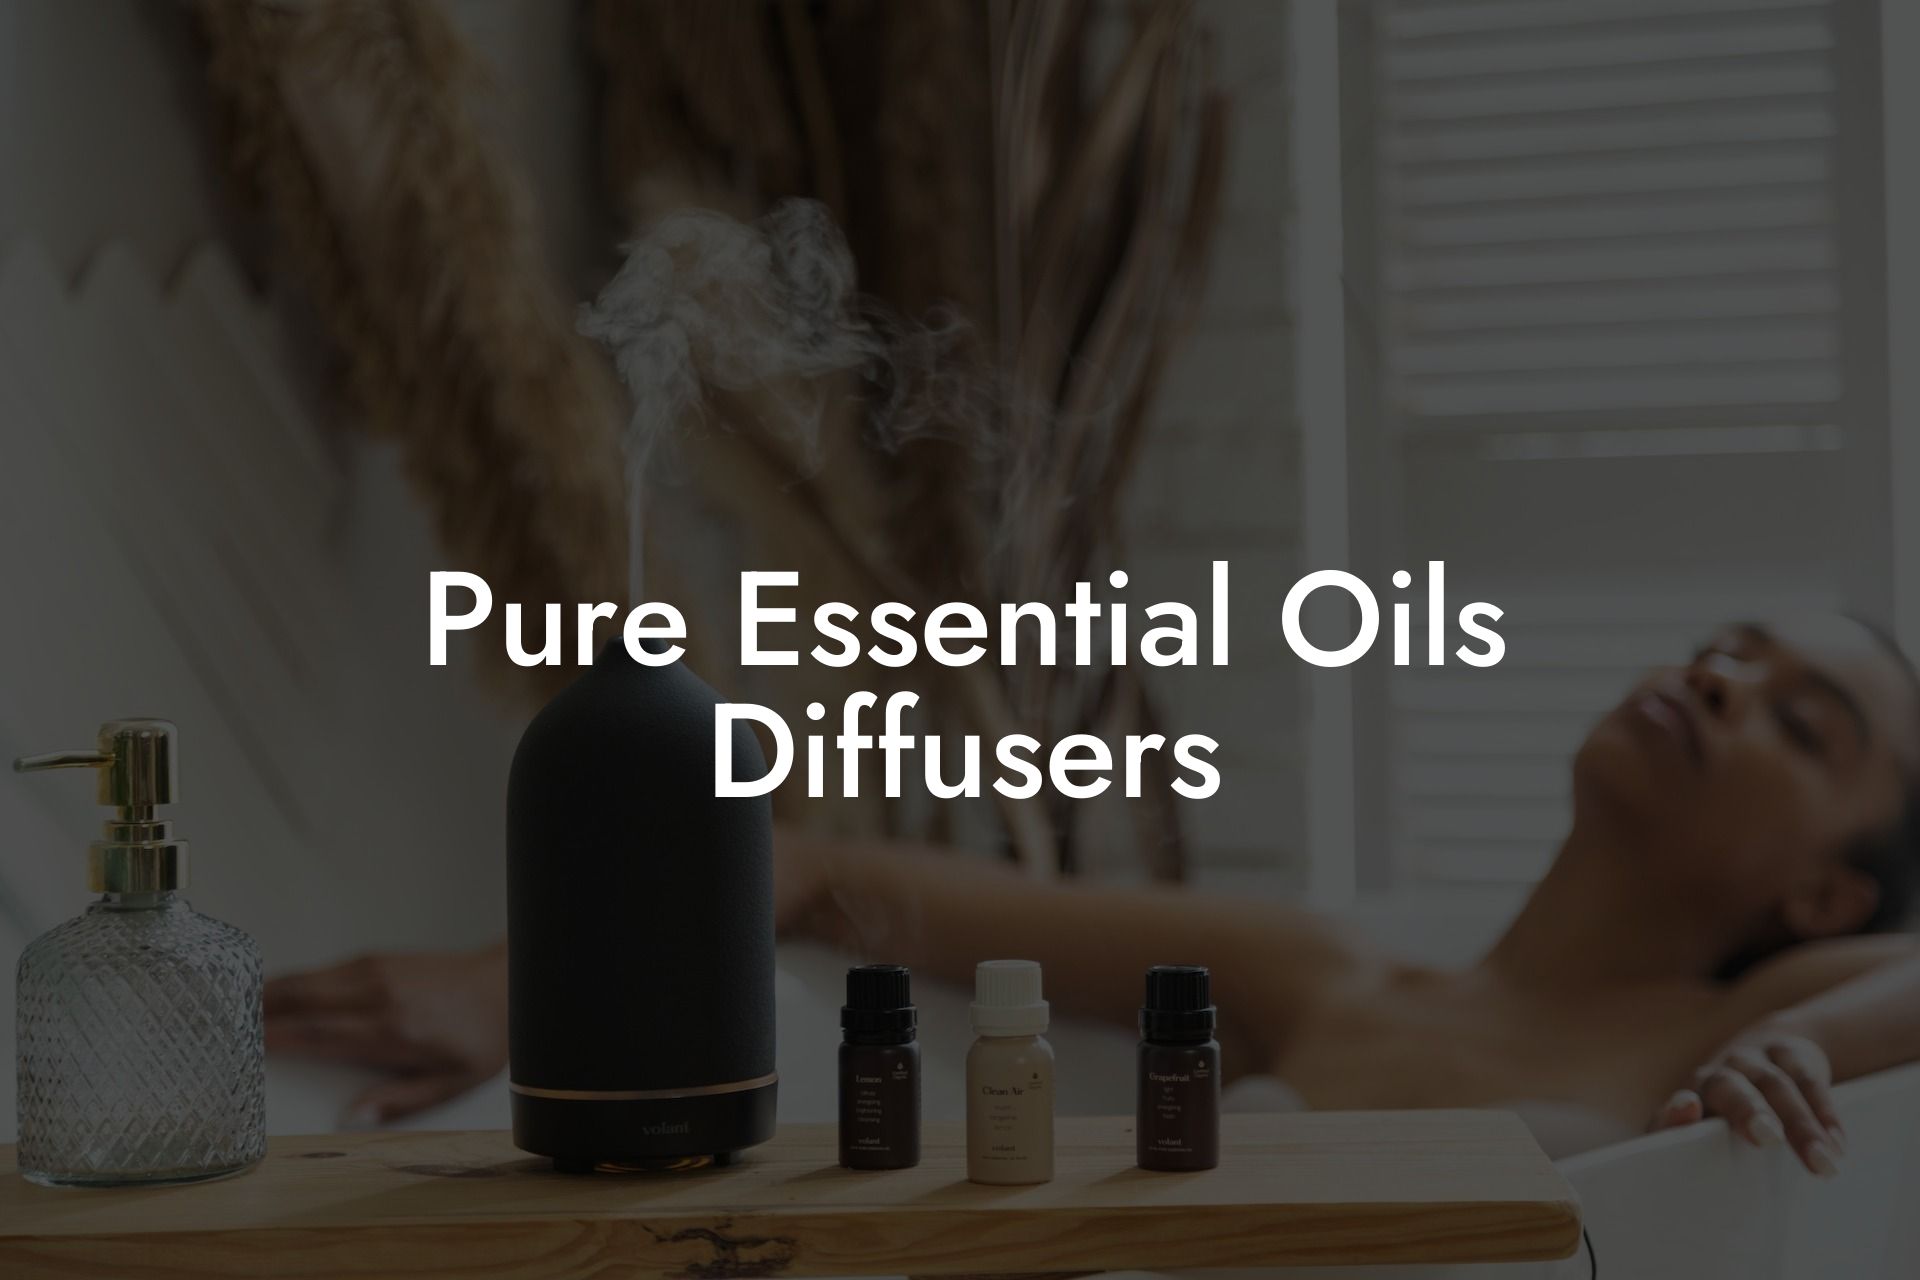 Pure Essential Oils Diffusers